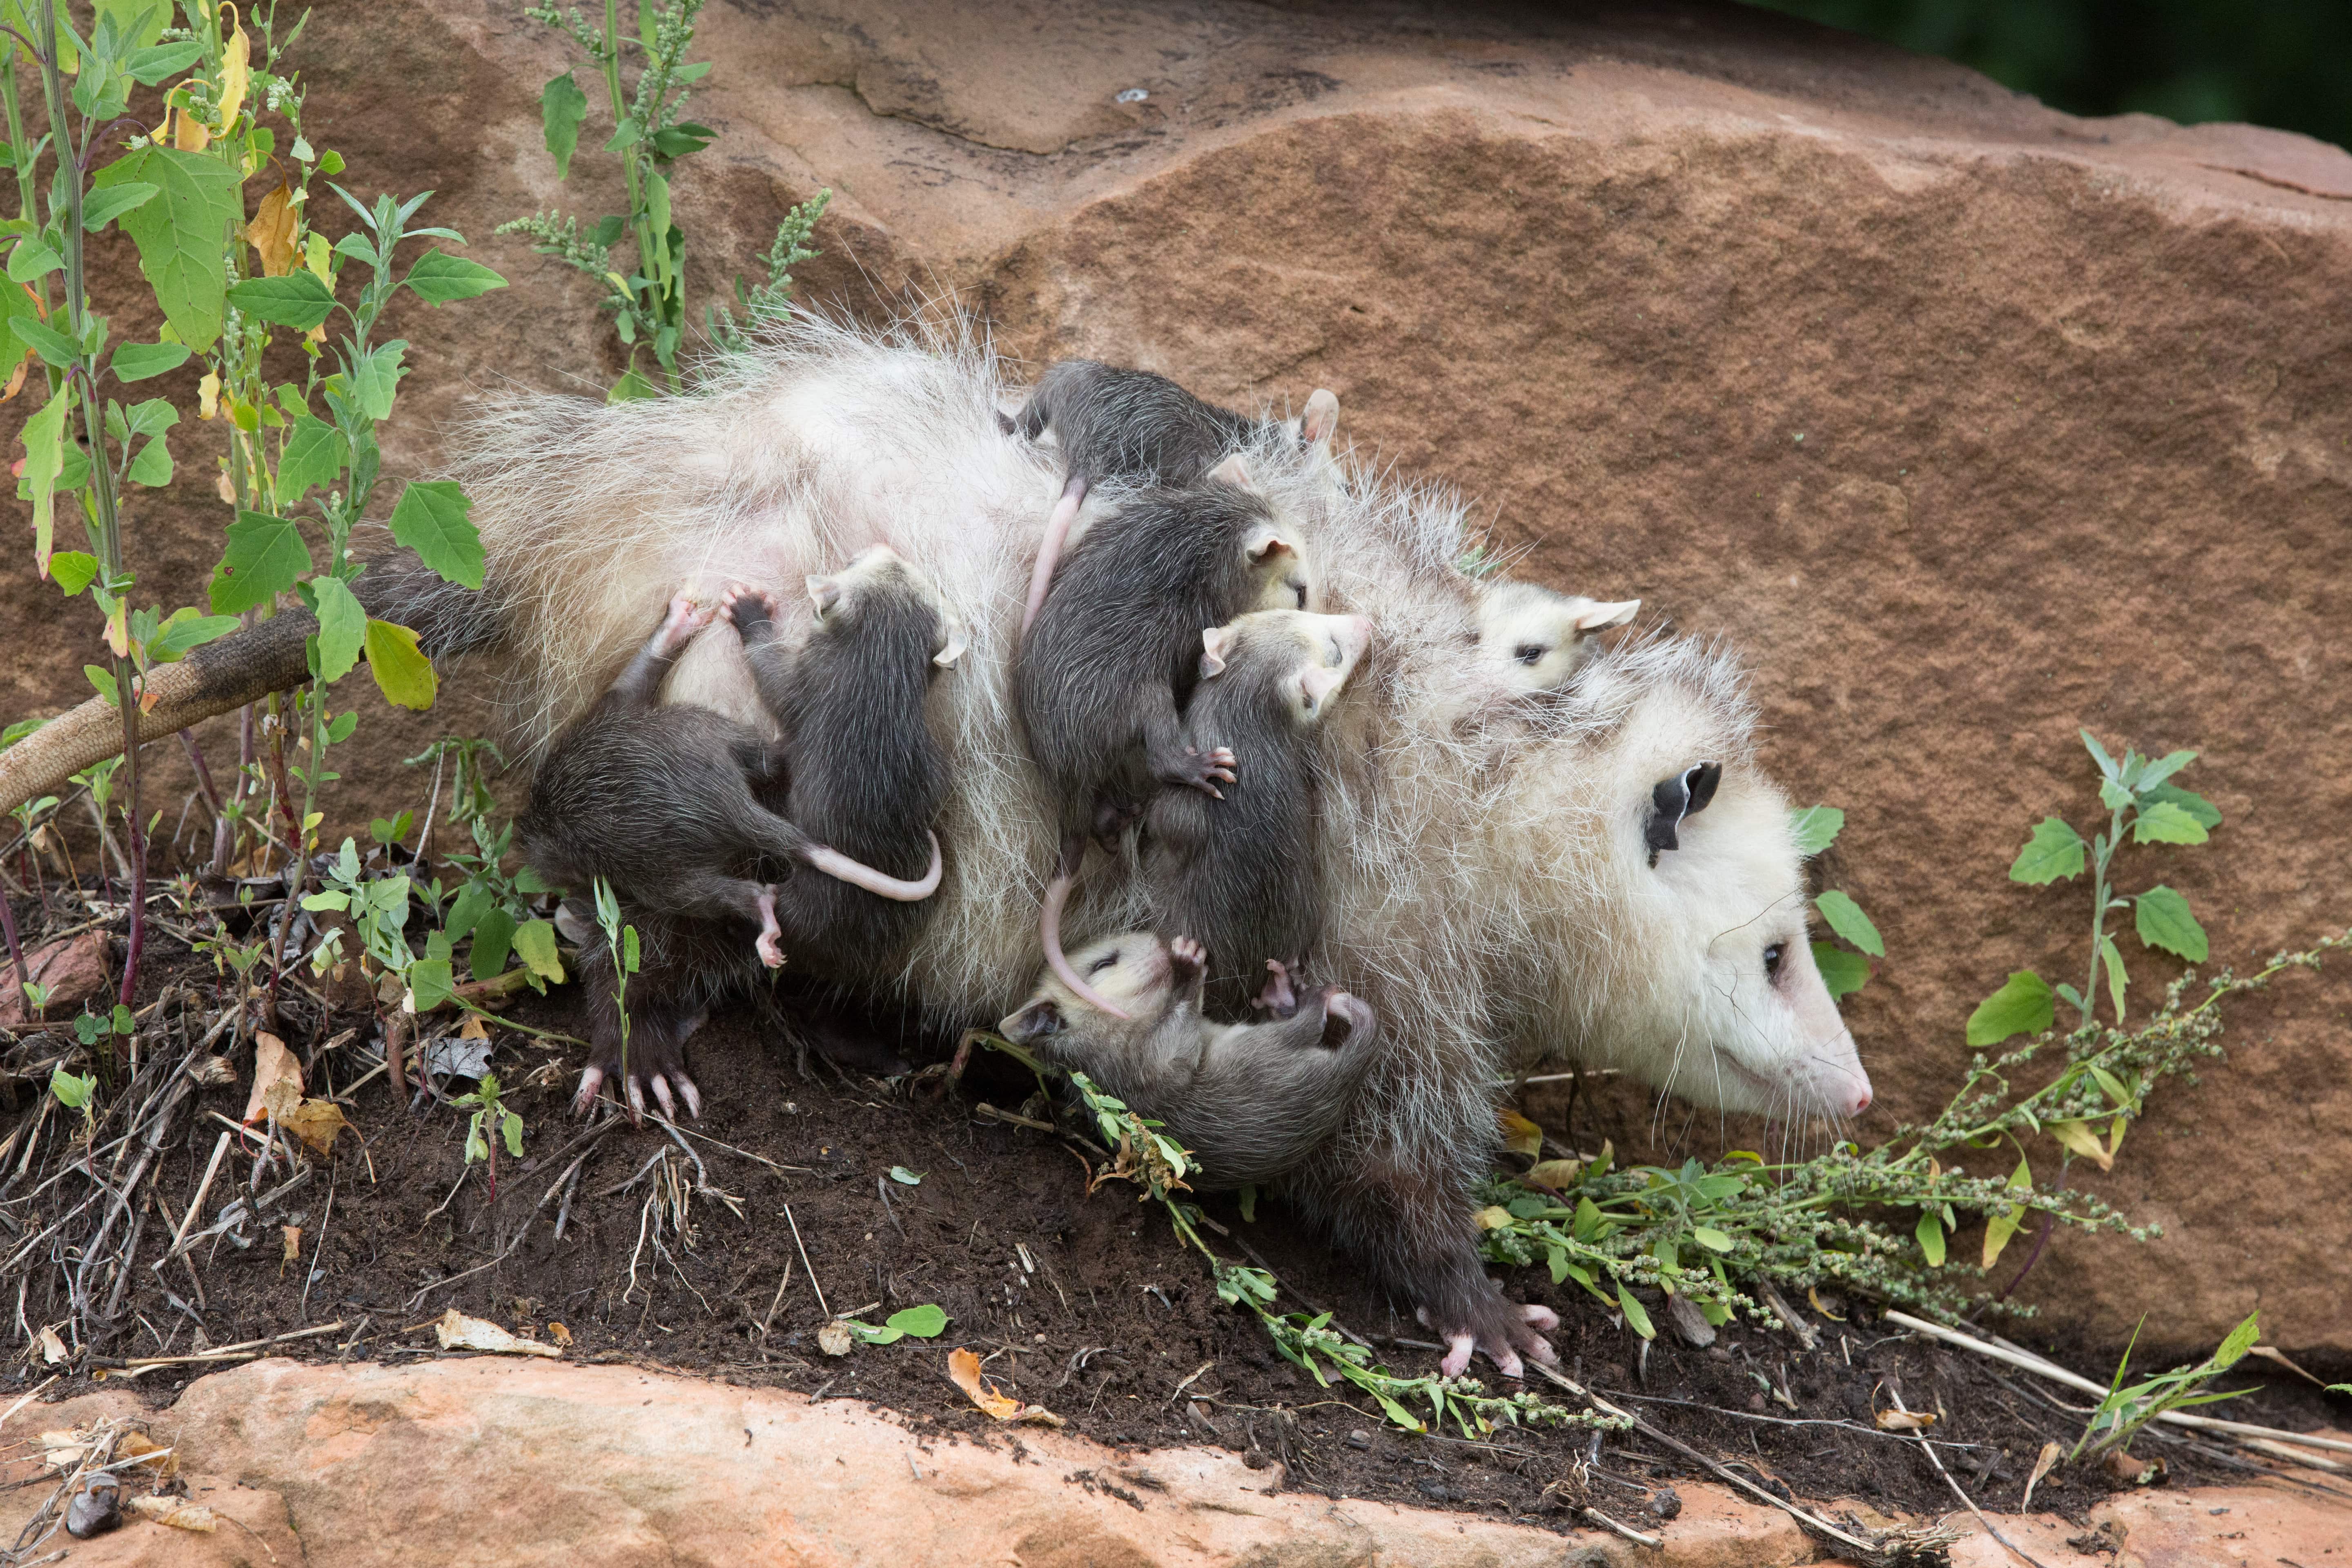 A mother opossum with seven babies clinging to her